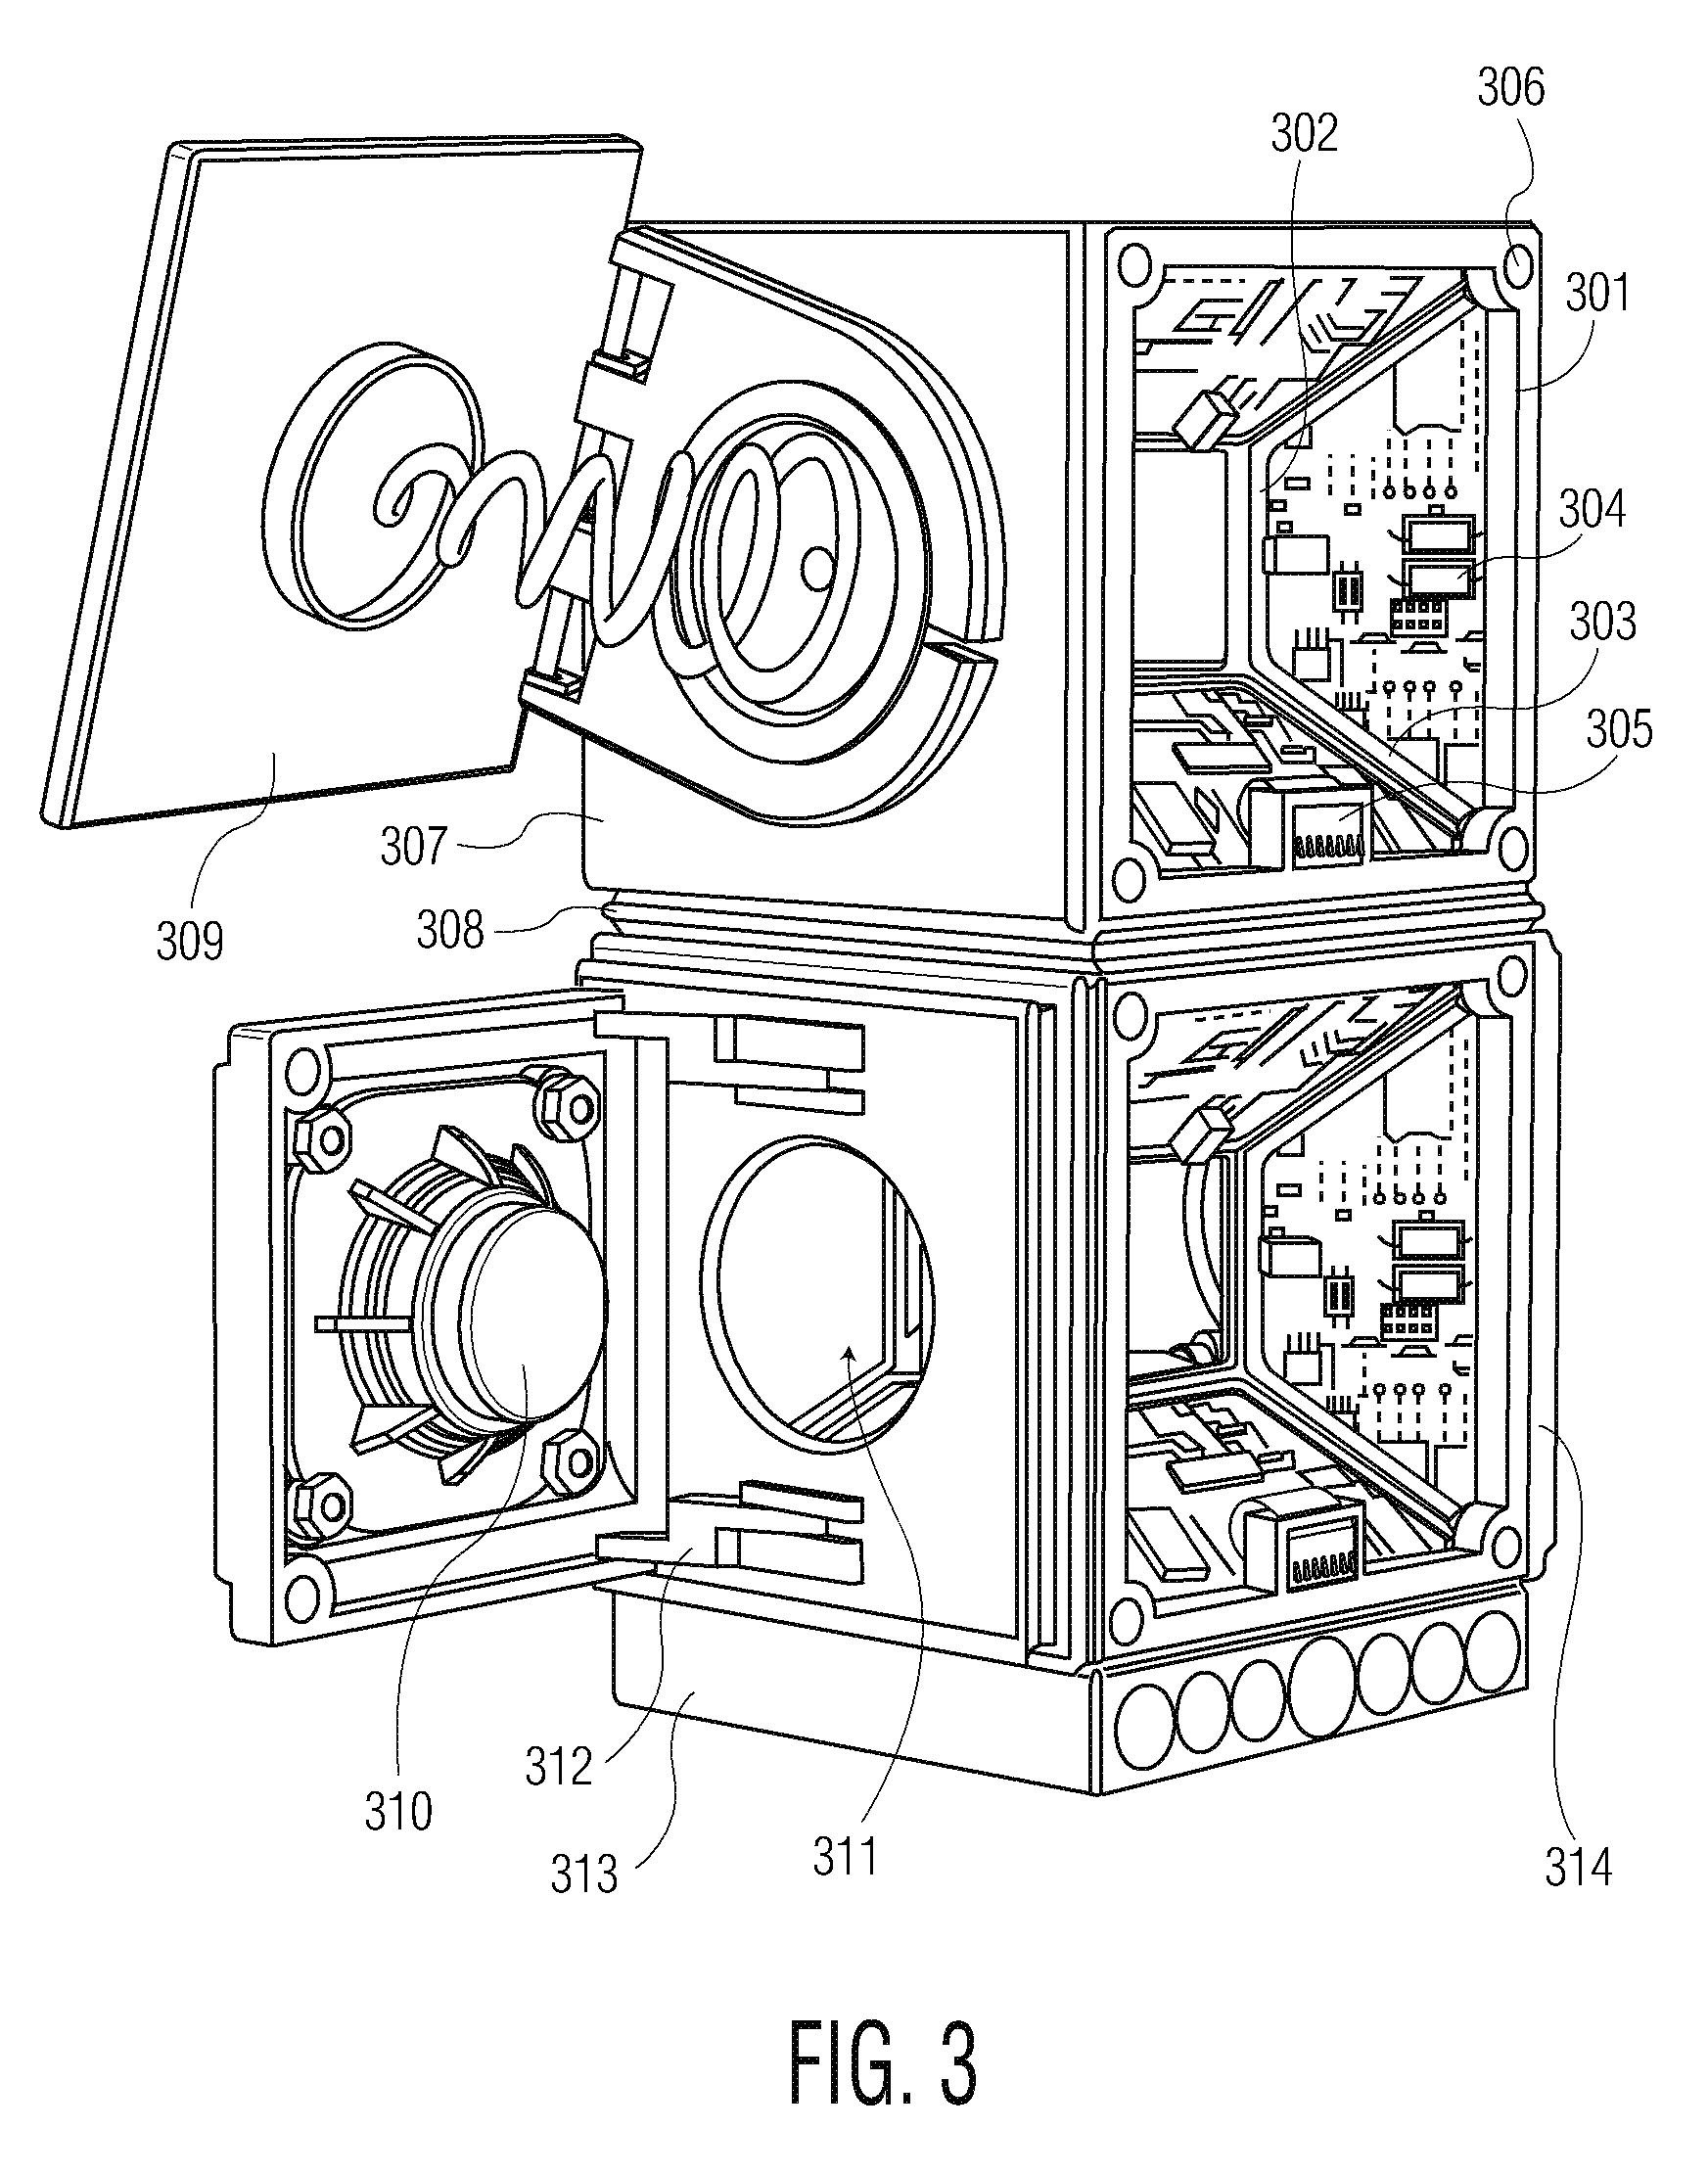 Modular quick-connect A/V system and methods thereof